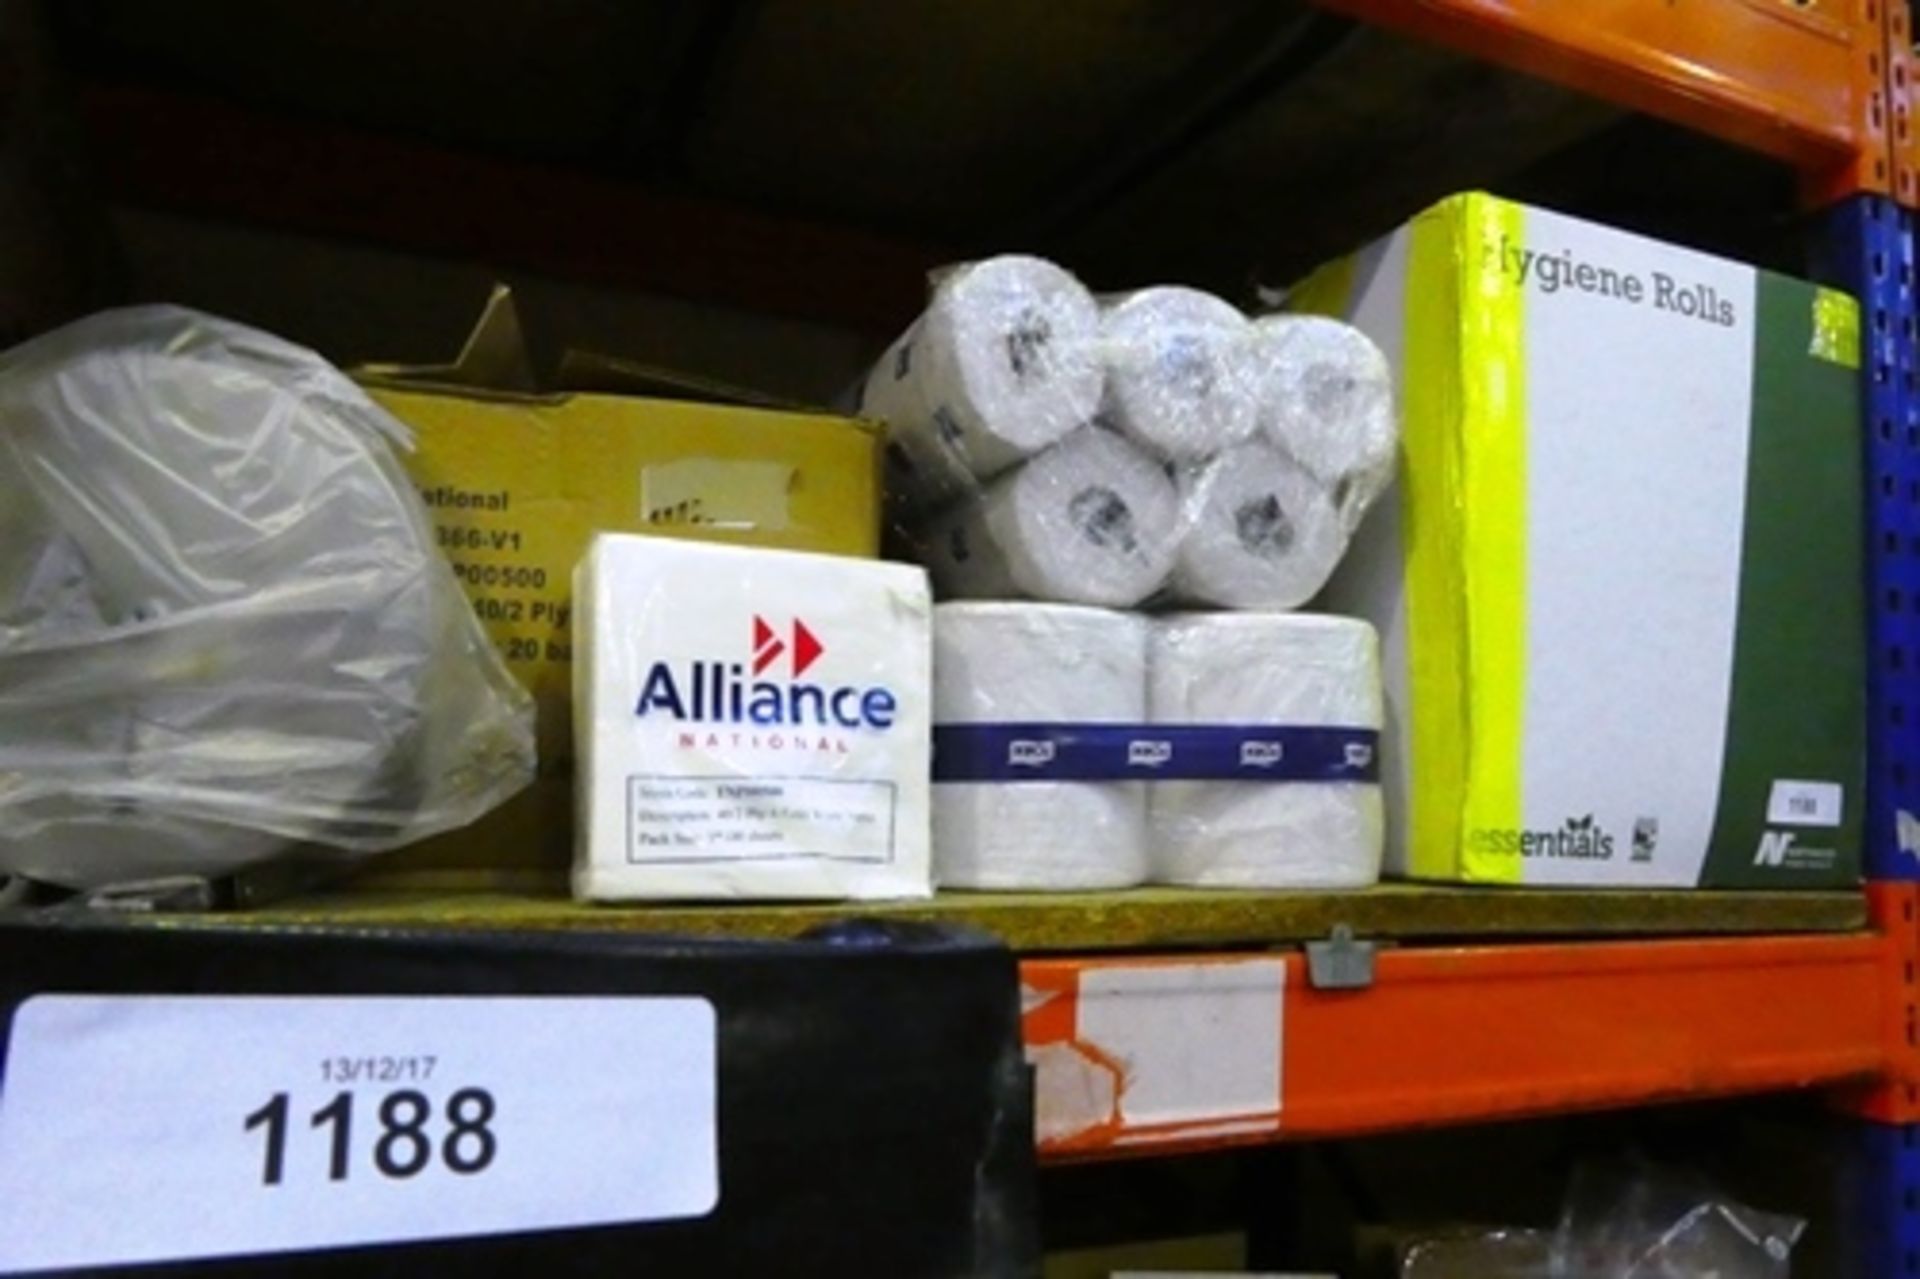 Approximately a half shelf of cleaning rolls including Hygiene rolls, Tork rolls and a box of 2